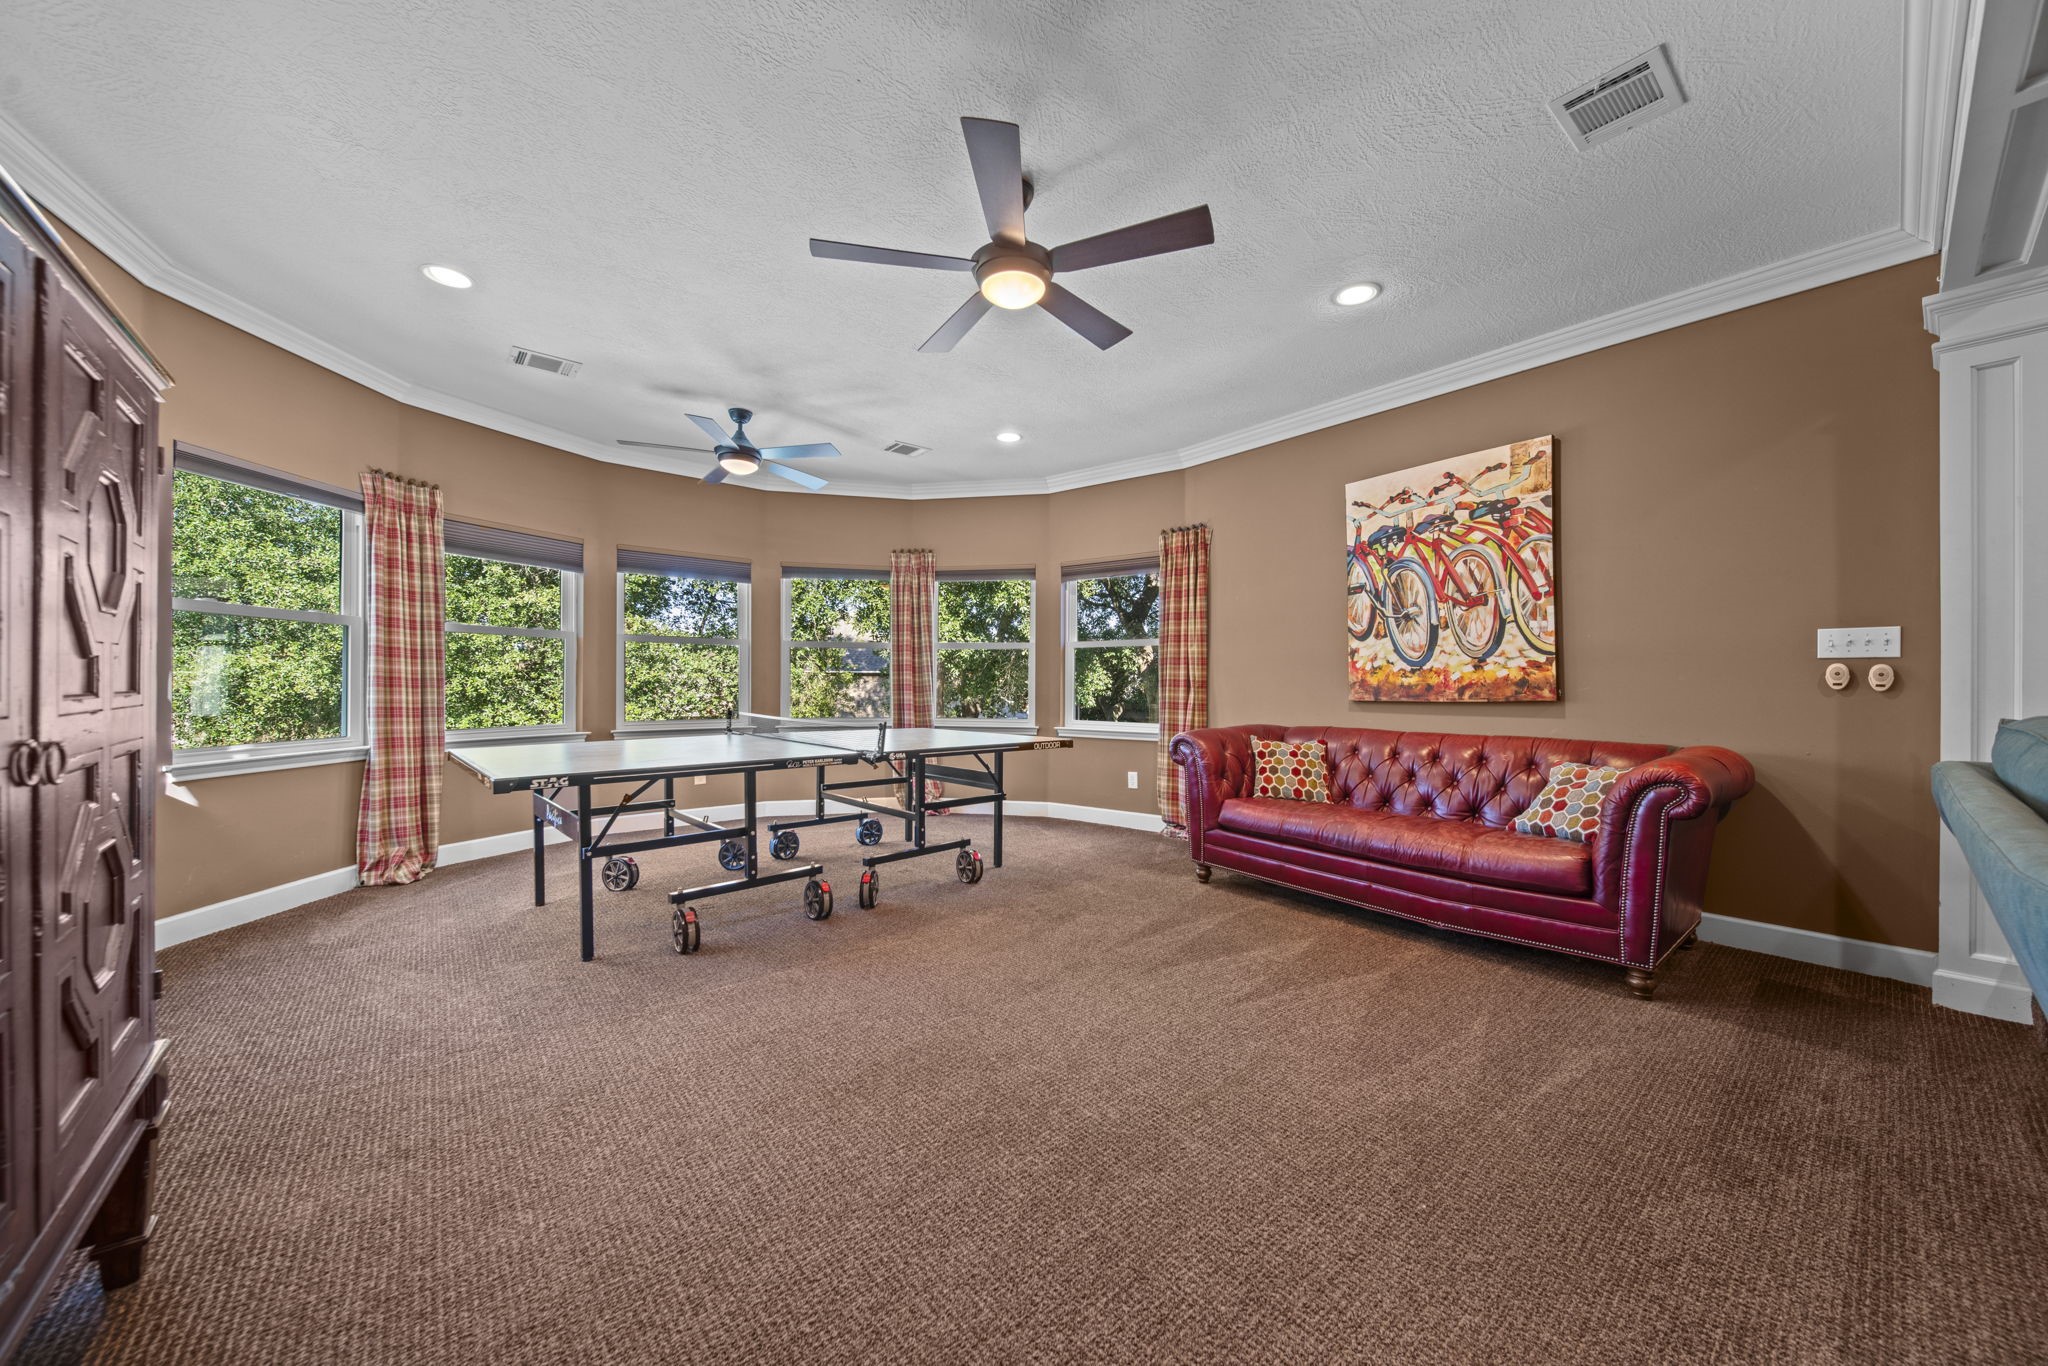 Spacious game room with sufficient space for a ping-pong table & other games you love.